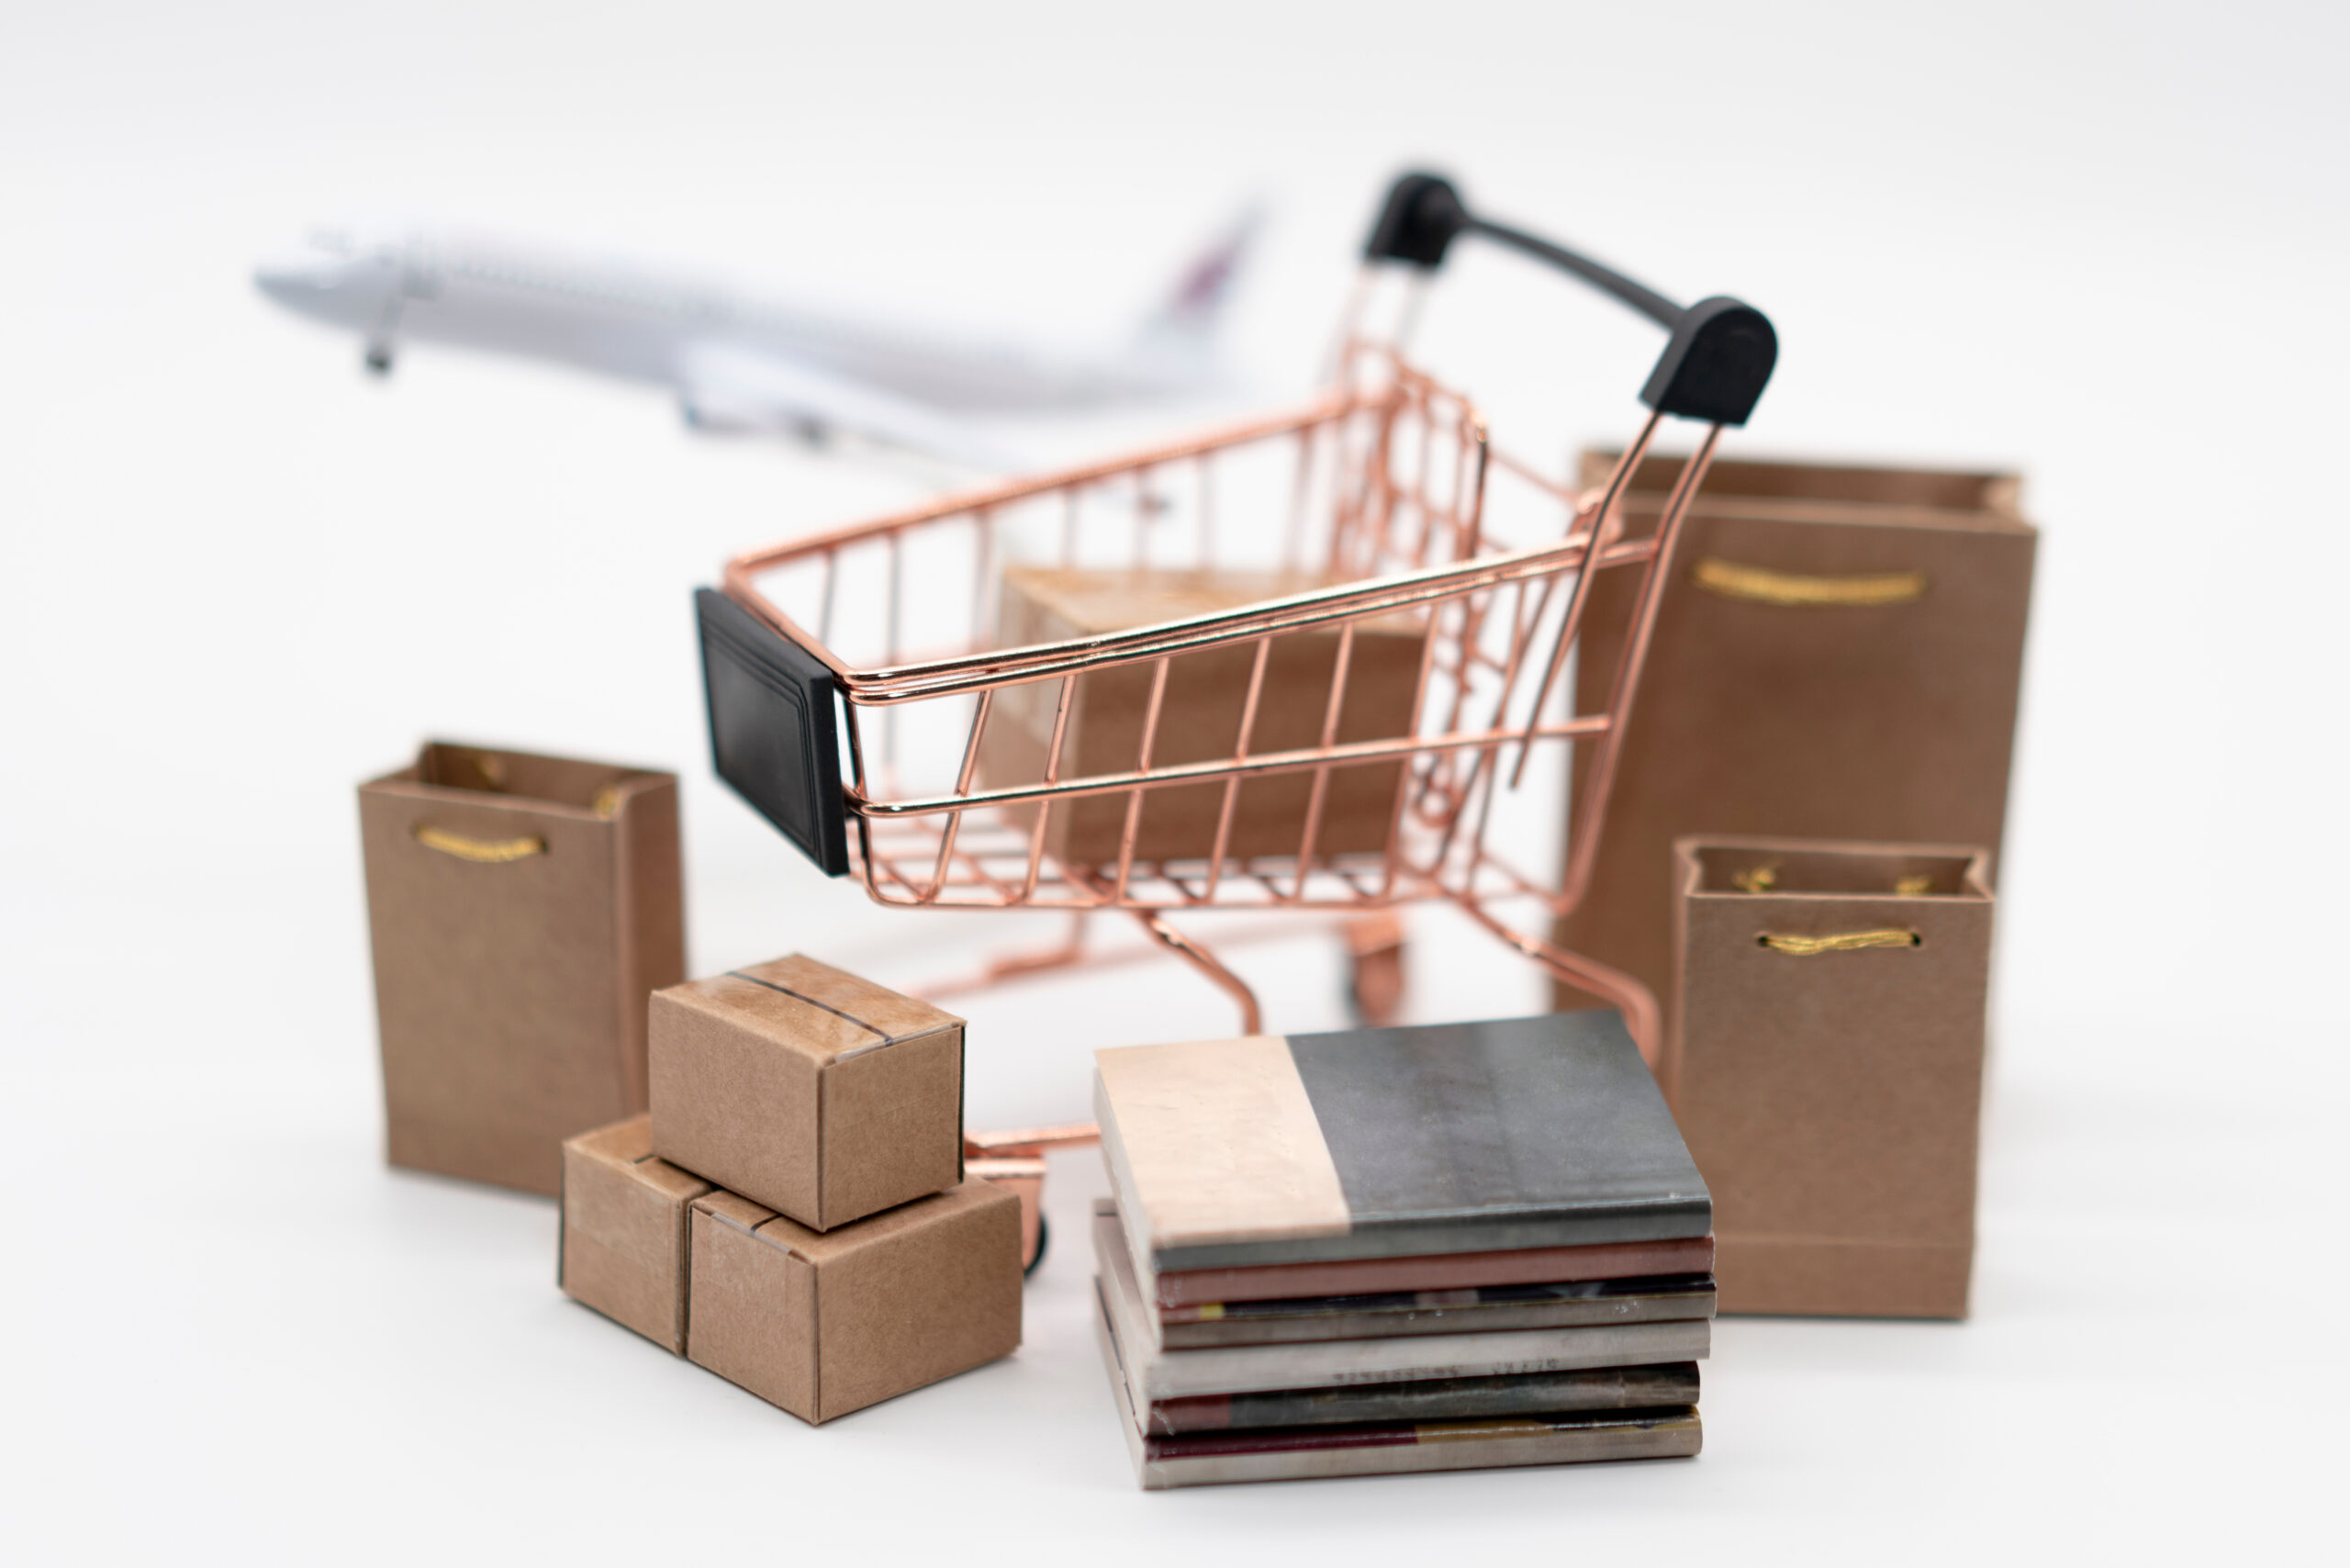 Cross-border sales growing among brand focused shoppers, ESW research reveals